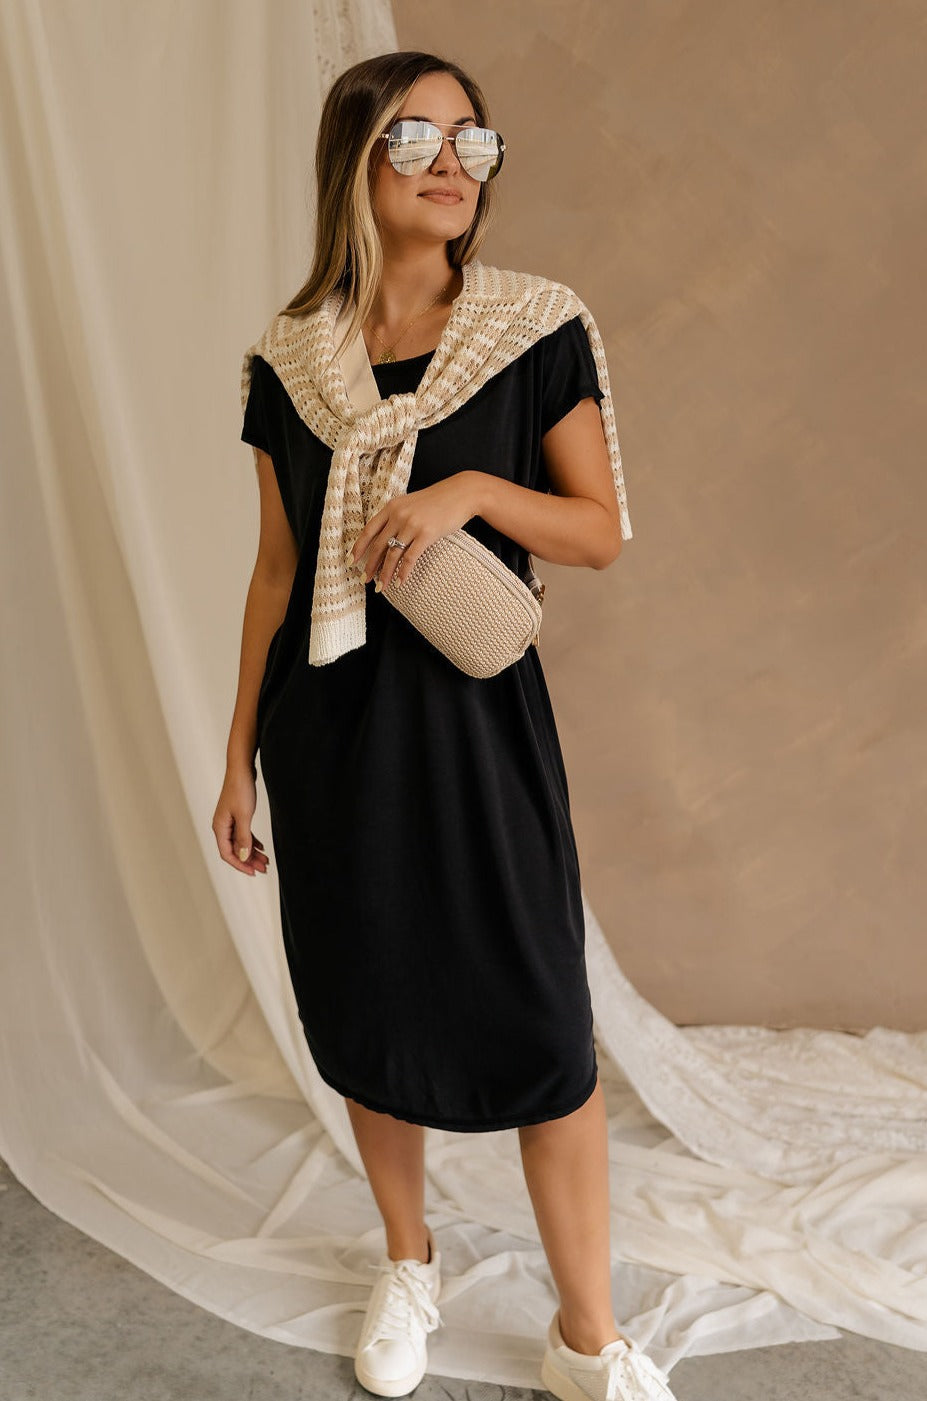 Full body front view of female model wearing the Remy Black Short Sleeve Midi Dress that features black knit fabric, short sleeves, midi length, and side slits. Worn with Rebecca Ivory Sling Bag and sweater around her shoulders.